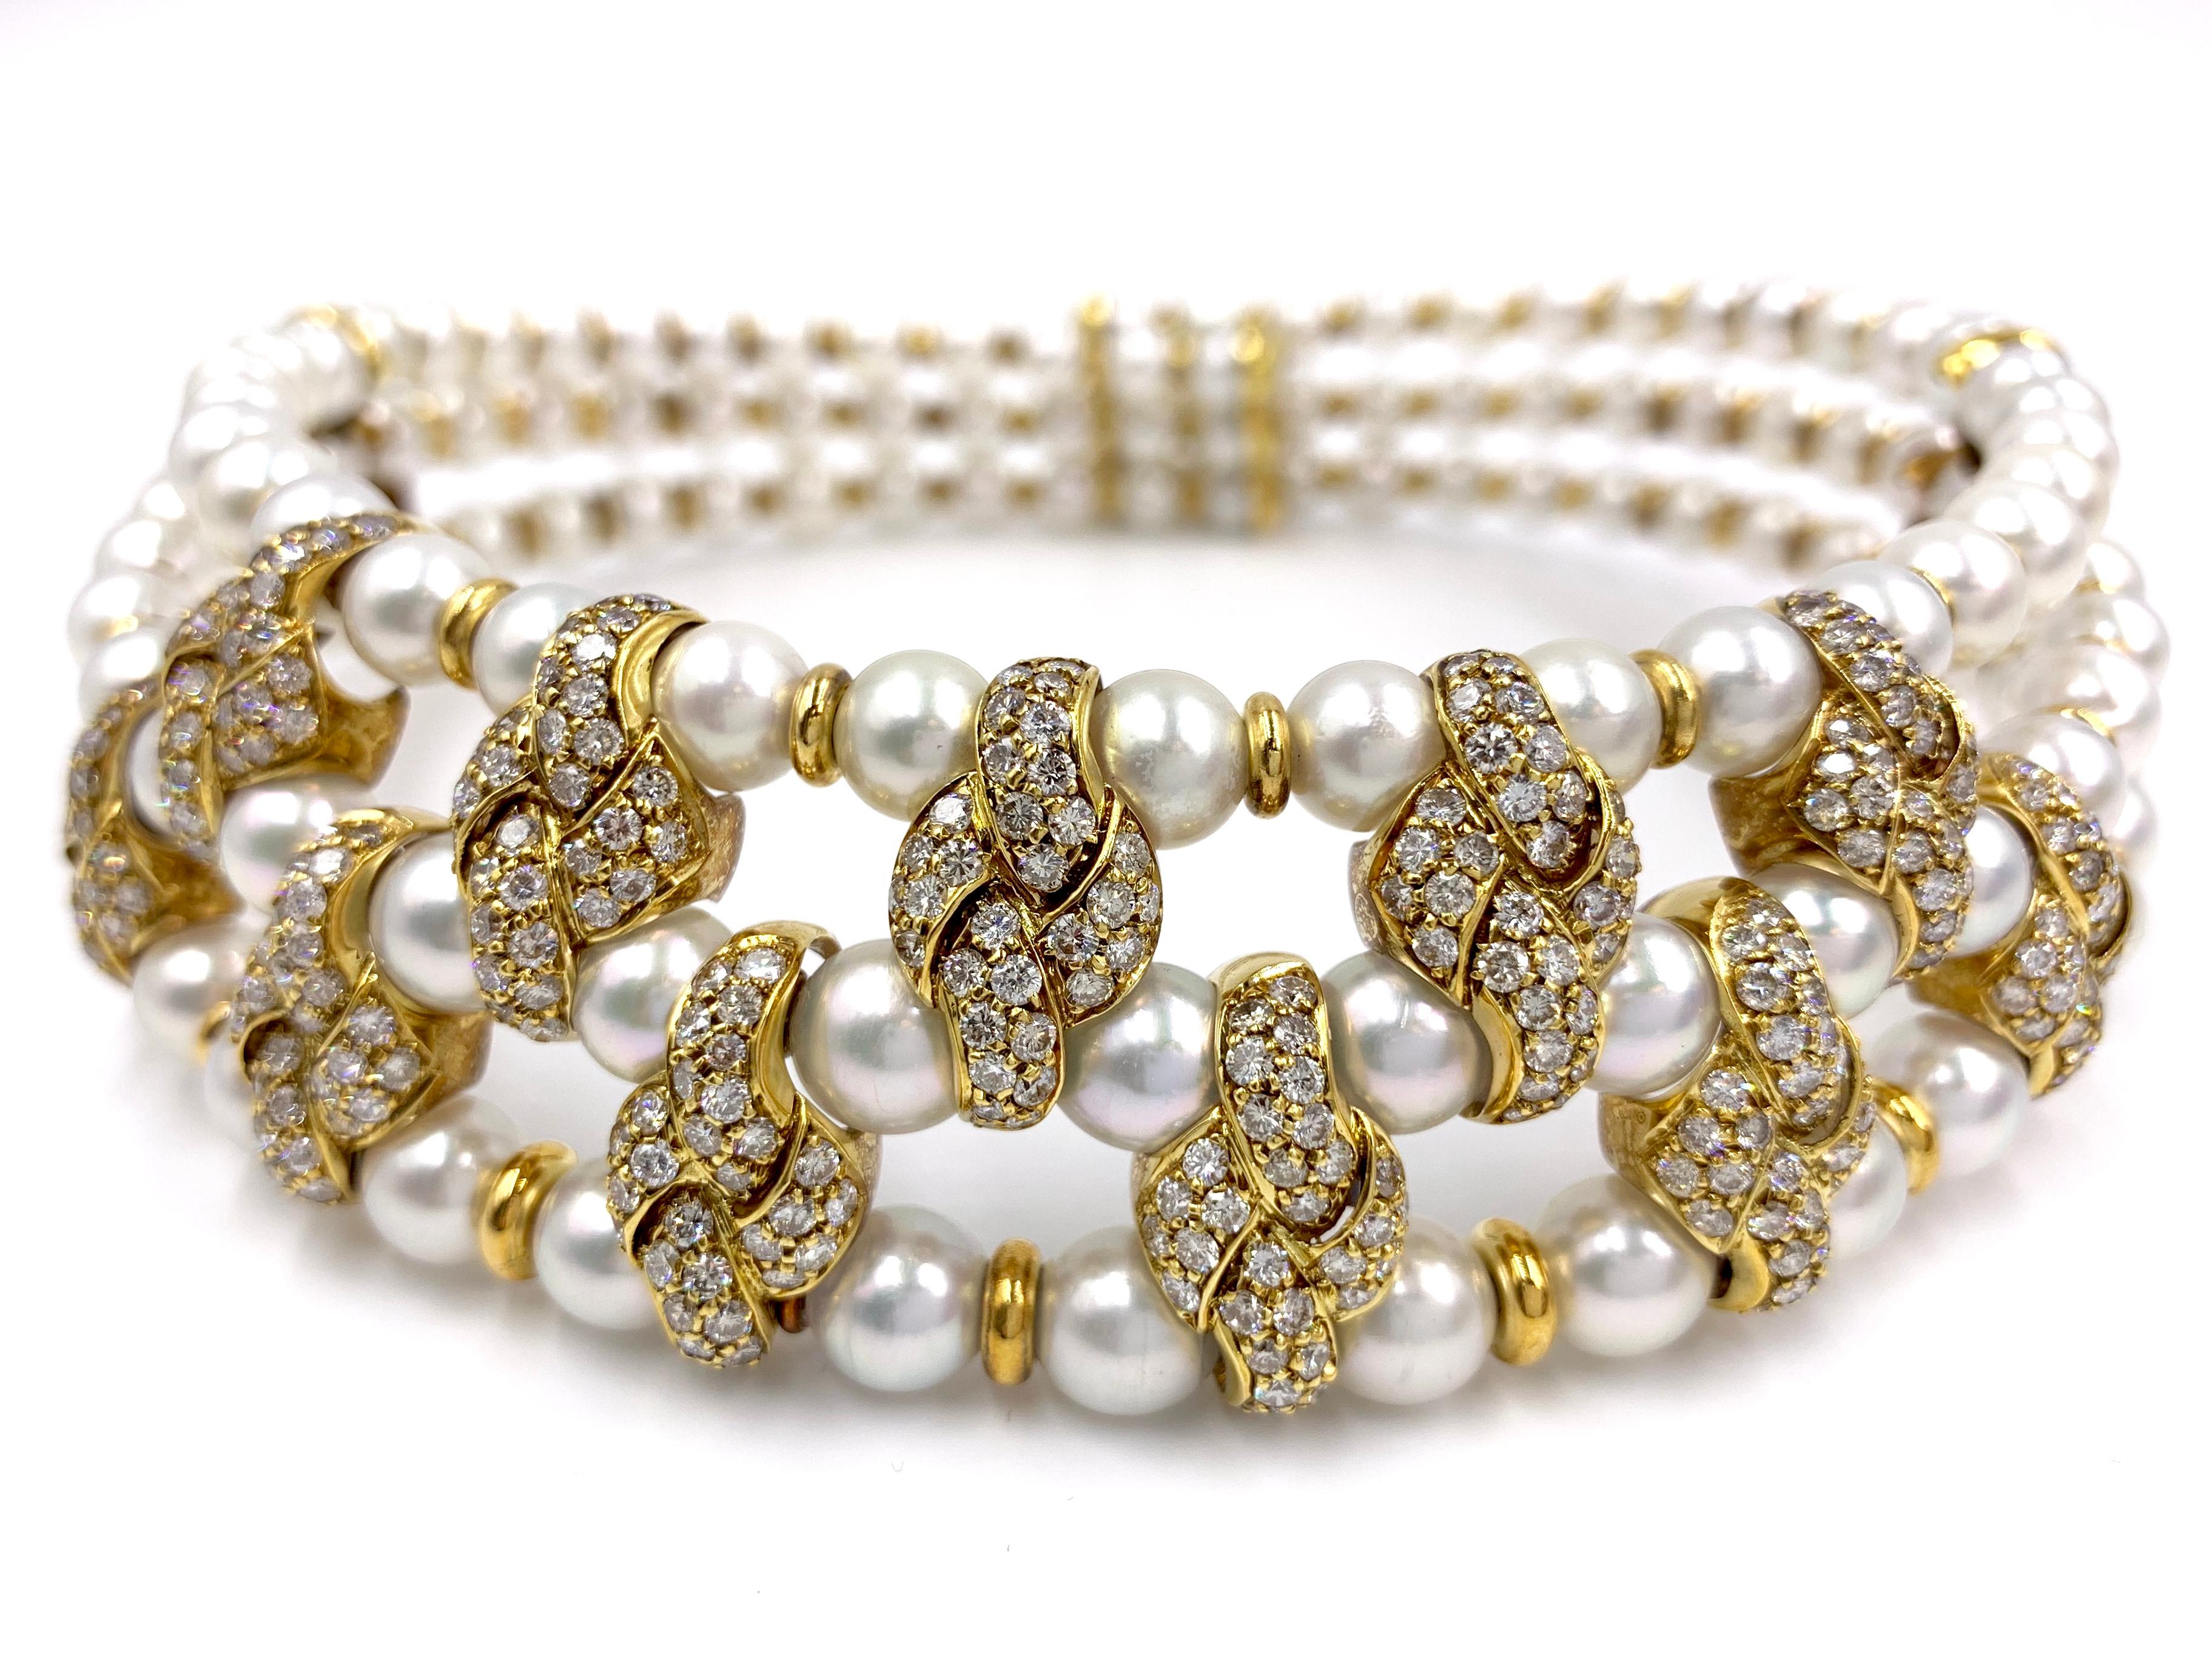 Exceptionally well-made flexible 18 karat yellow gold Victorian inspired choker necklace featuring three rows of lustrous graduated natural pearls and 7.50 carats of white diamonds. Necklace designed and signed by Giovane. Diamonds have an